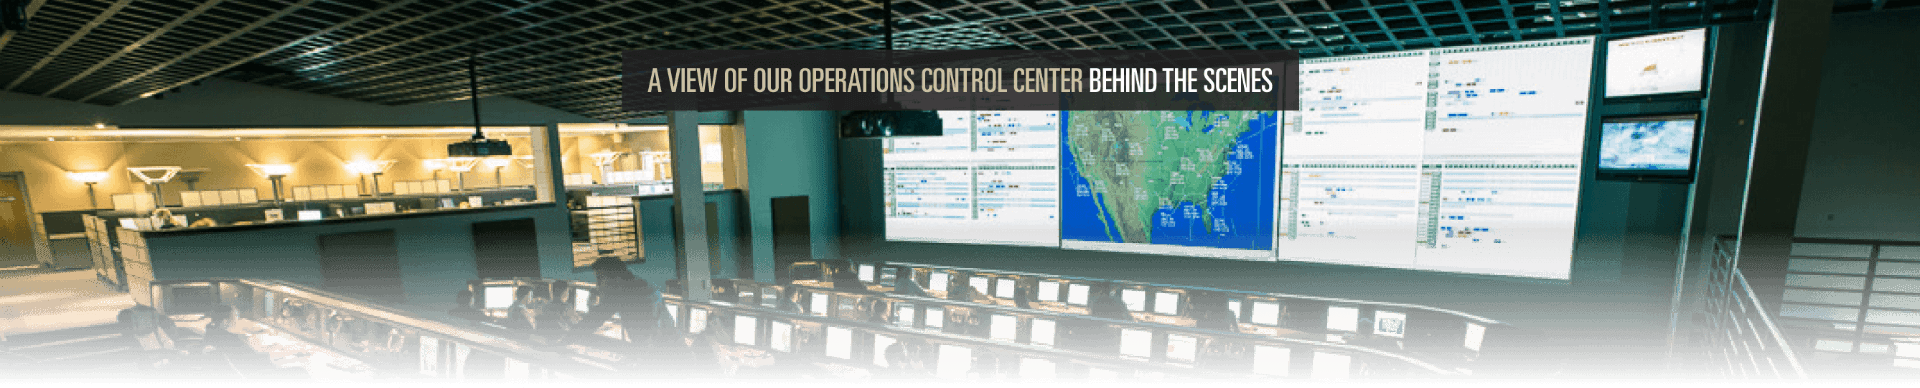 Tour Flight Options state-of-the-art Operations Center